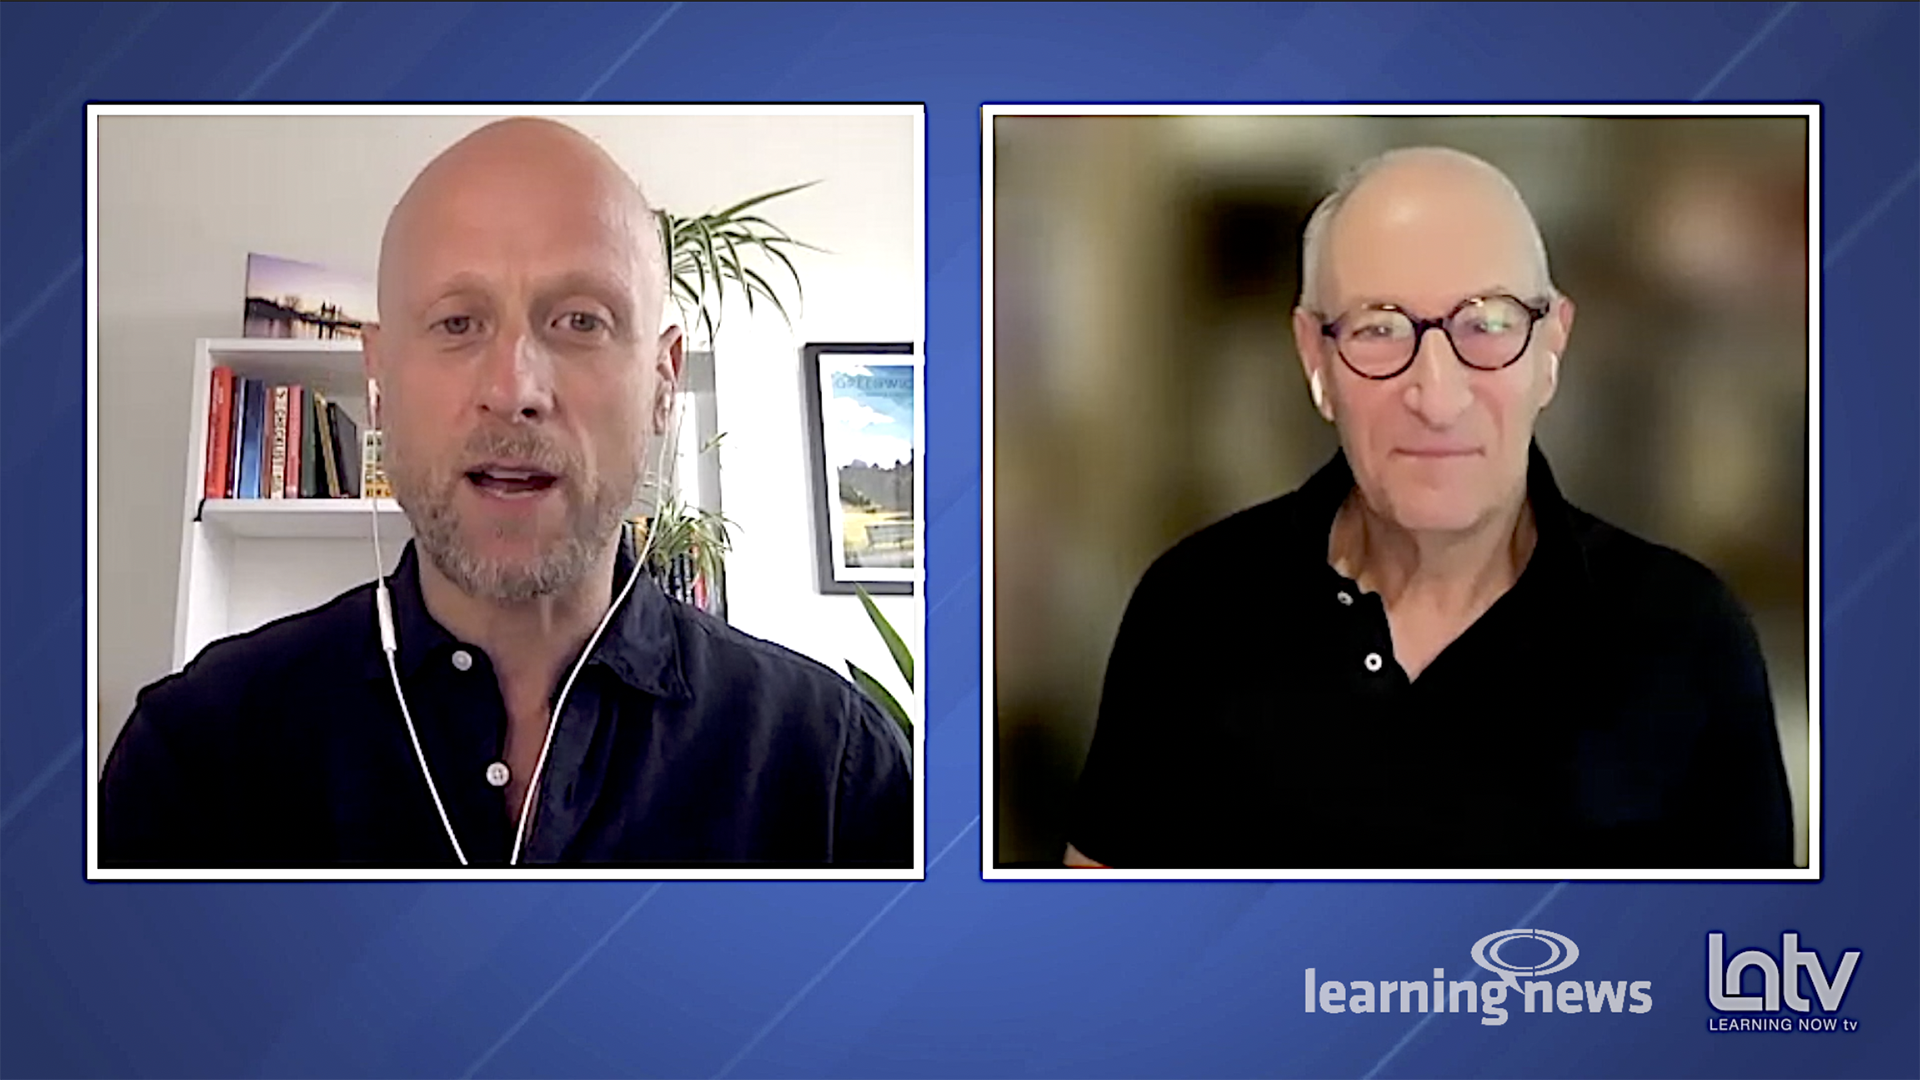 David James joins Learning Now TV, Sep 29